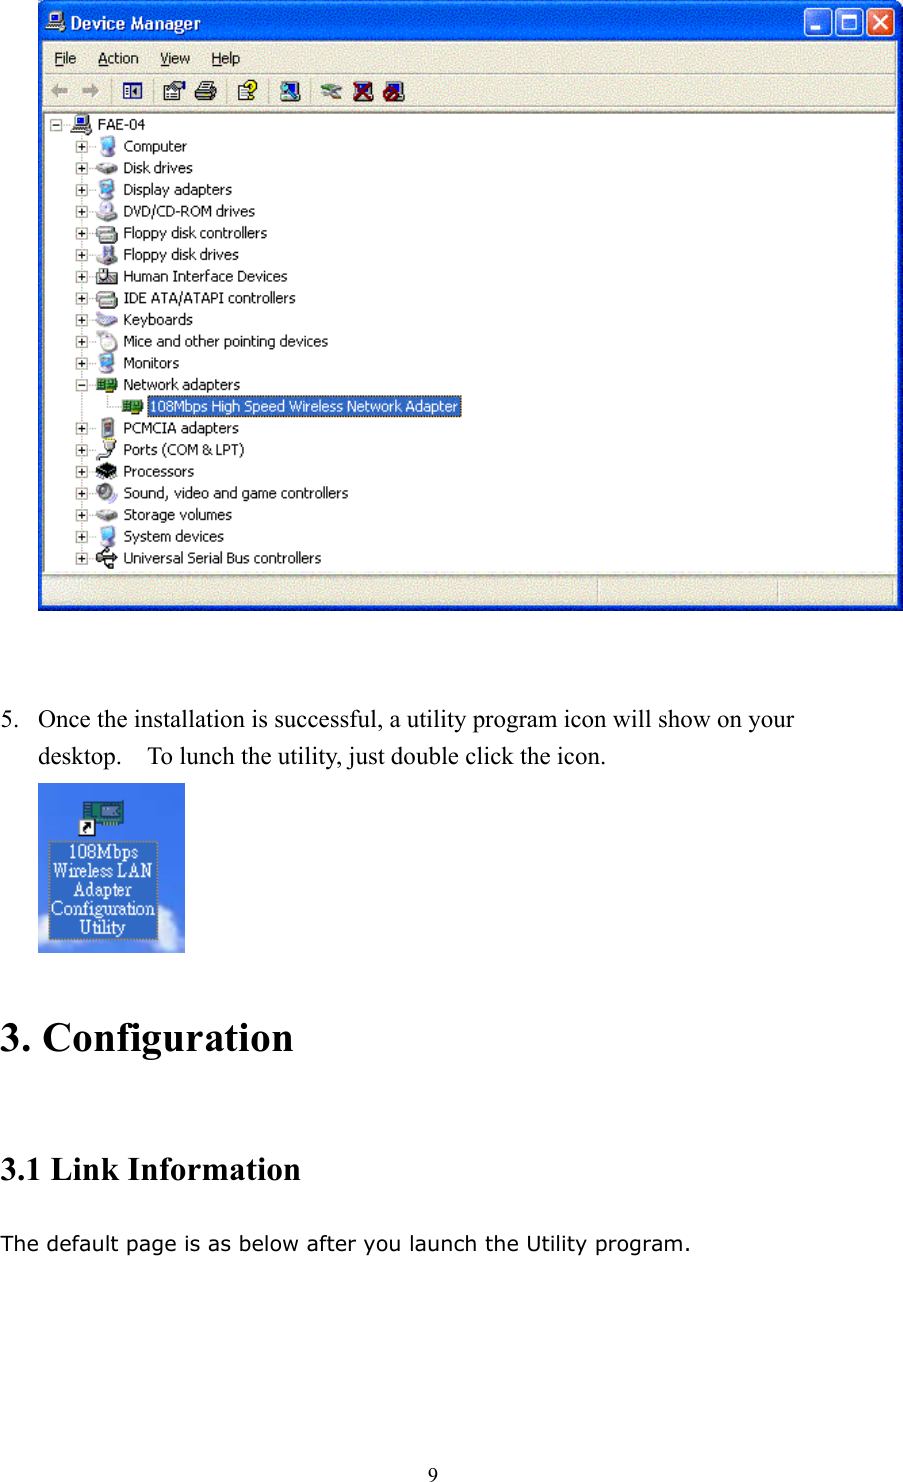  9  5.  Once the installation is successful, a utility program icon will show on your desktop.  To lunch the utility, just double click the icon.  3. Configuration 3.1 Link Information The default page is as below after you launch the Utility program. 